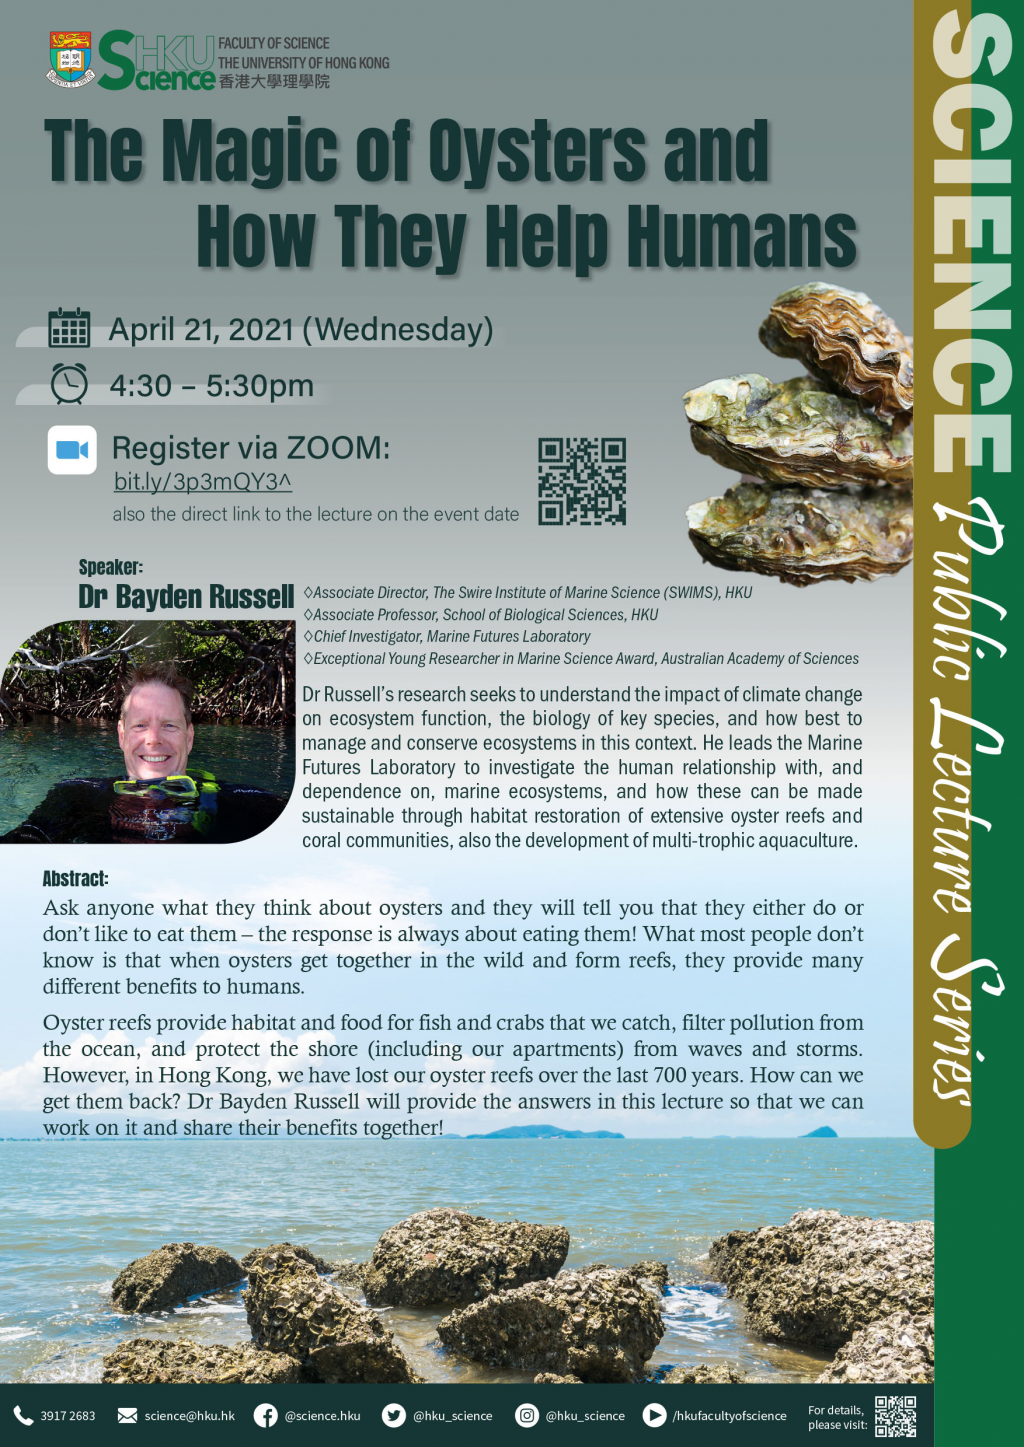 HKU Science Public Lecture Series - The Magic of Oysters and How They Help Humans (Apr 21, 2021)